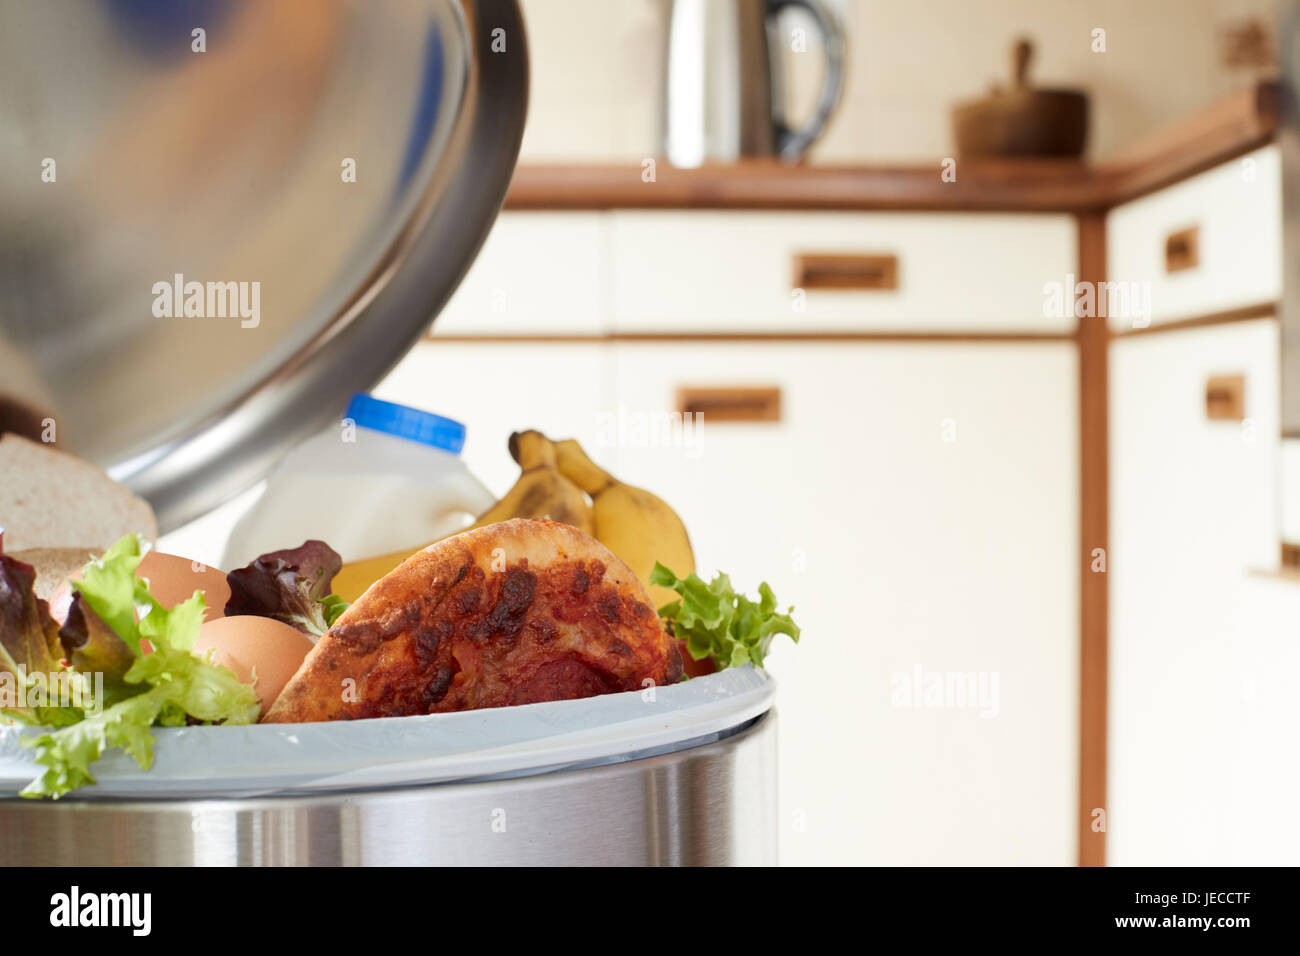 Fresh Food In Garbage Can To Illustrate Waste Stock Photo